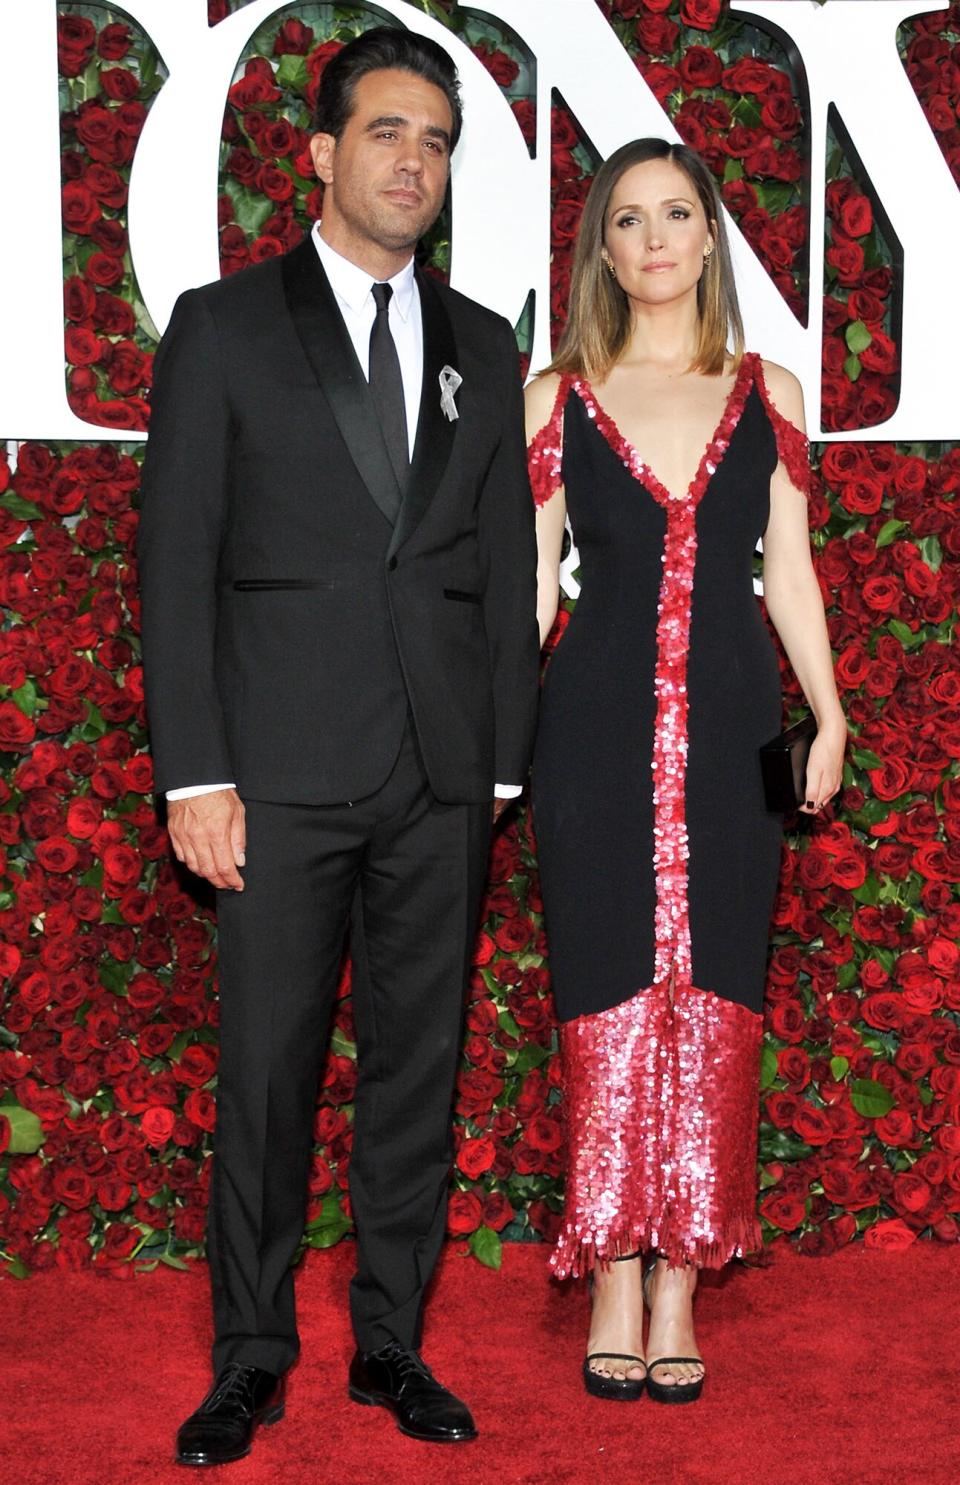 Bobby Cannavale (L) and Rose Byrne attend the 70th Annual Tony Awards at the Beacon Theatre on June 12, 2016 in New York City